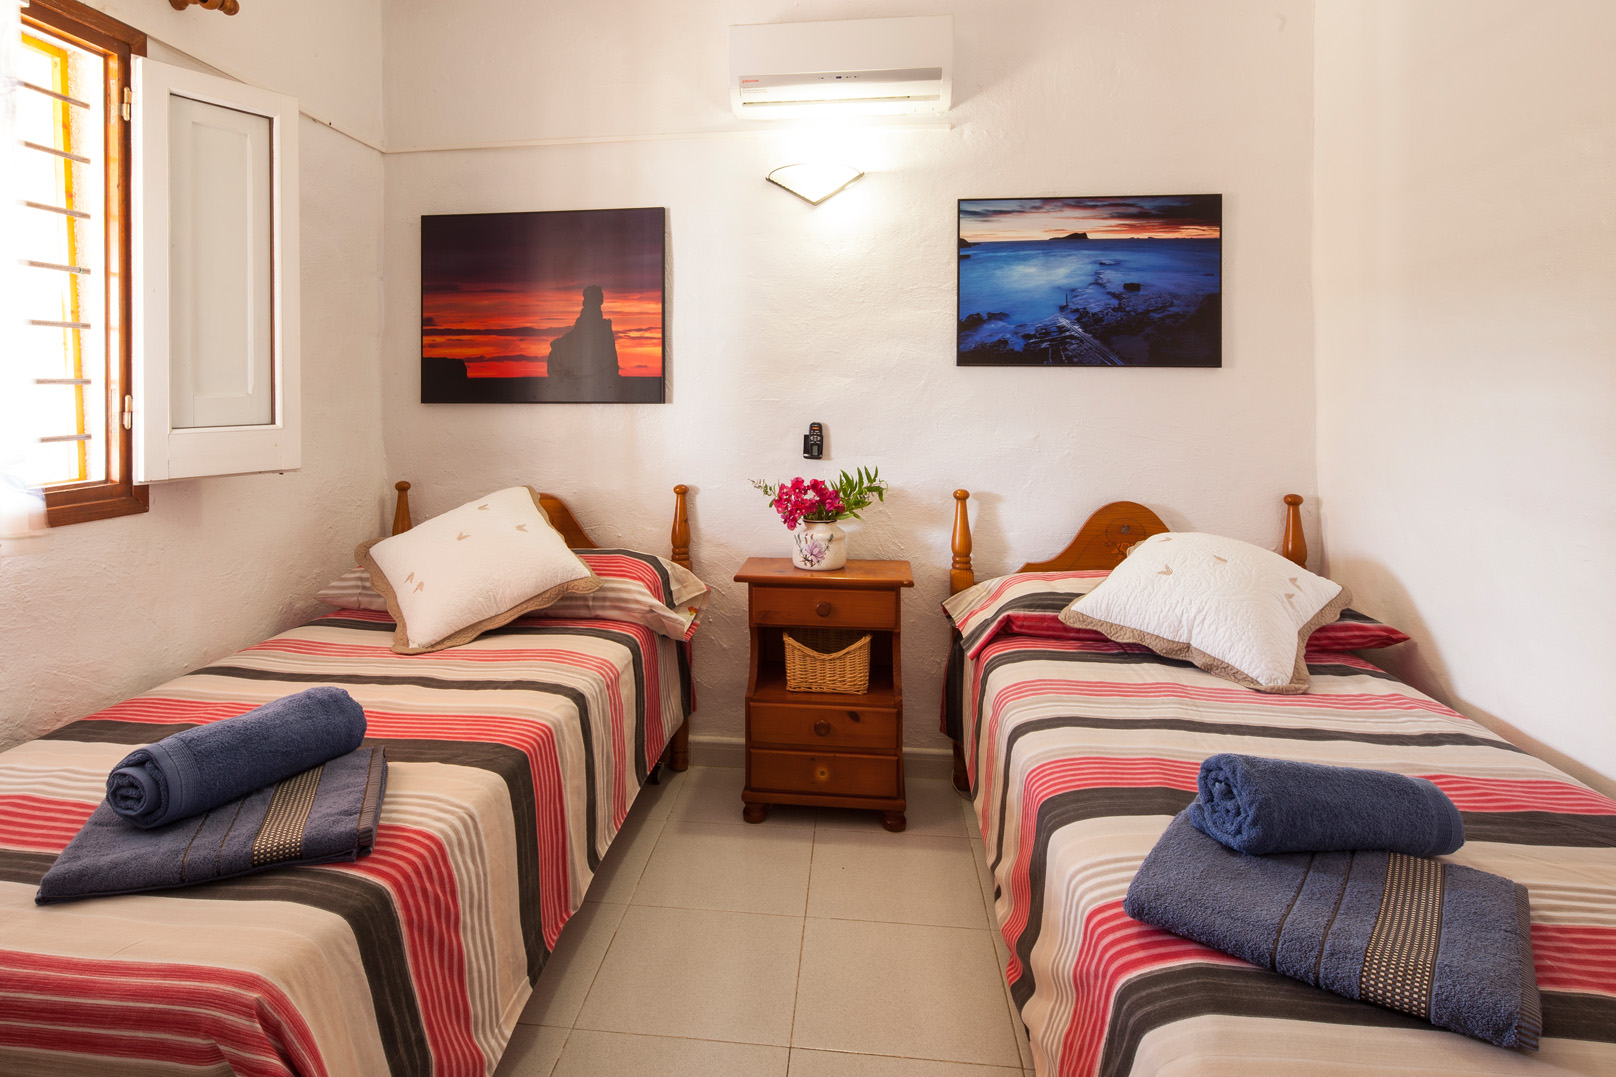 Room with two single beds in a rental house of Ibiza